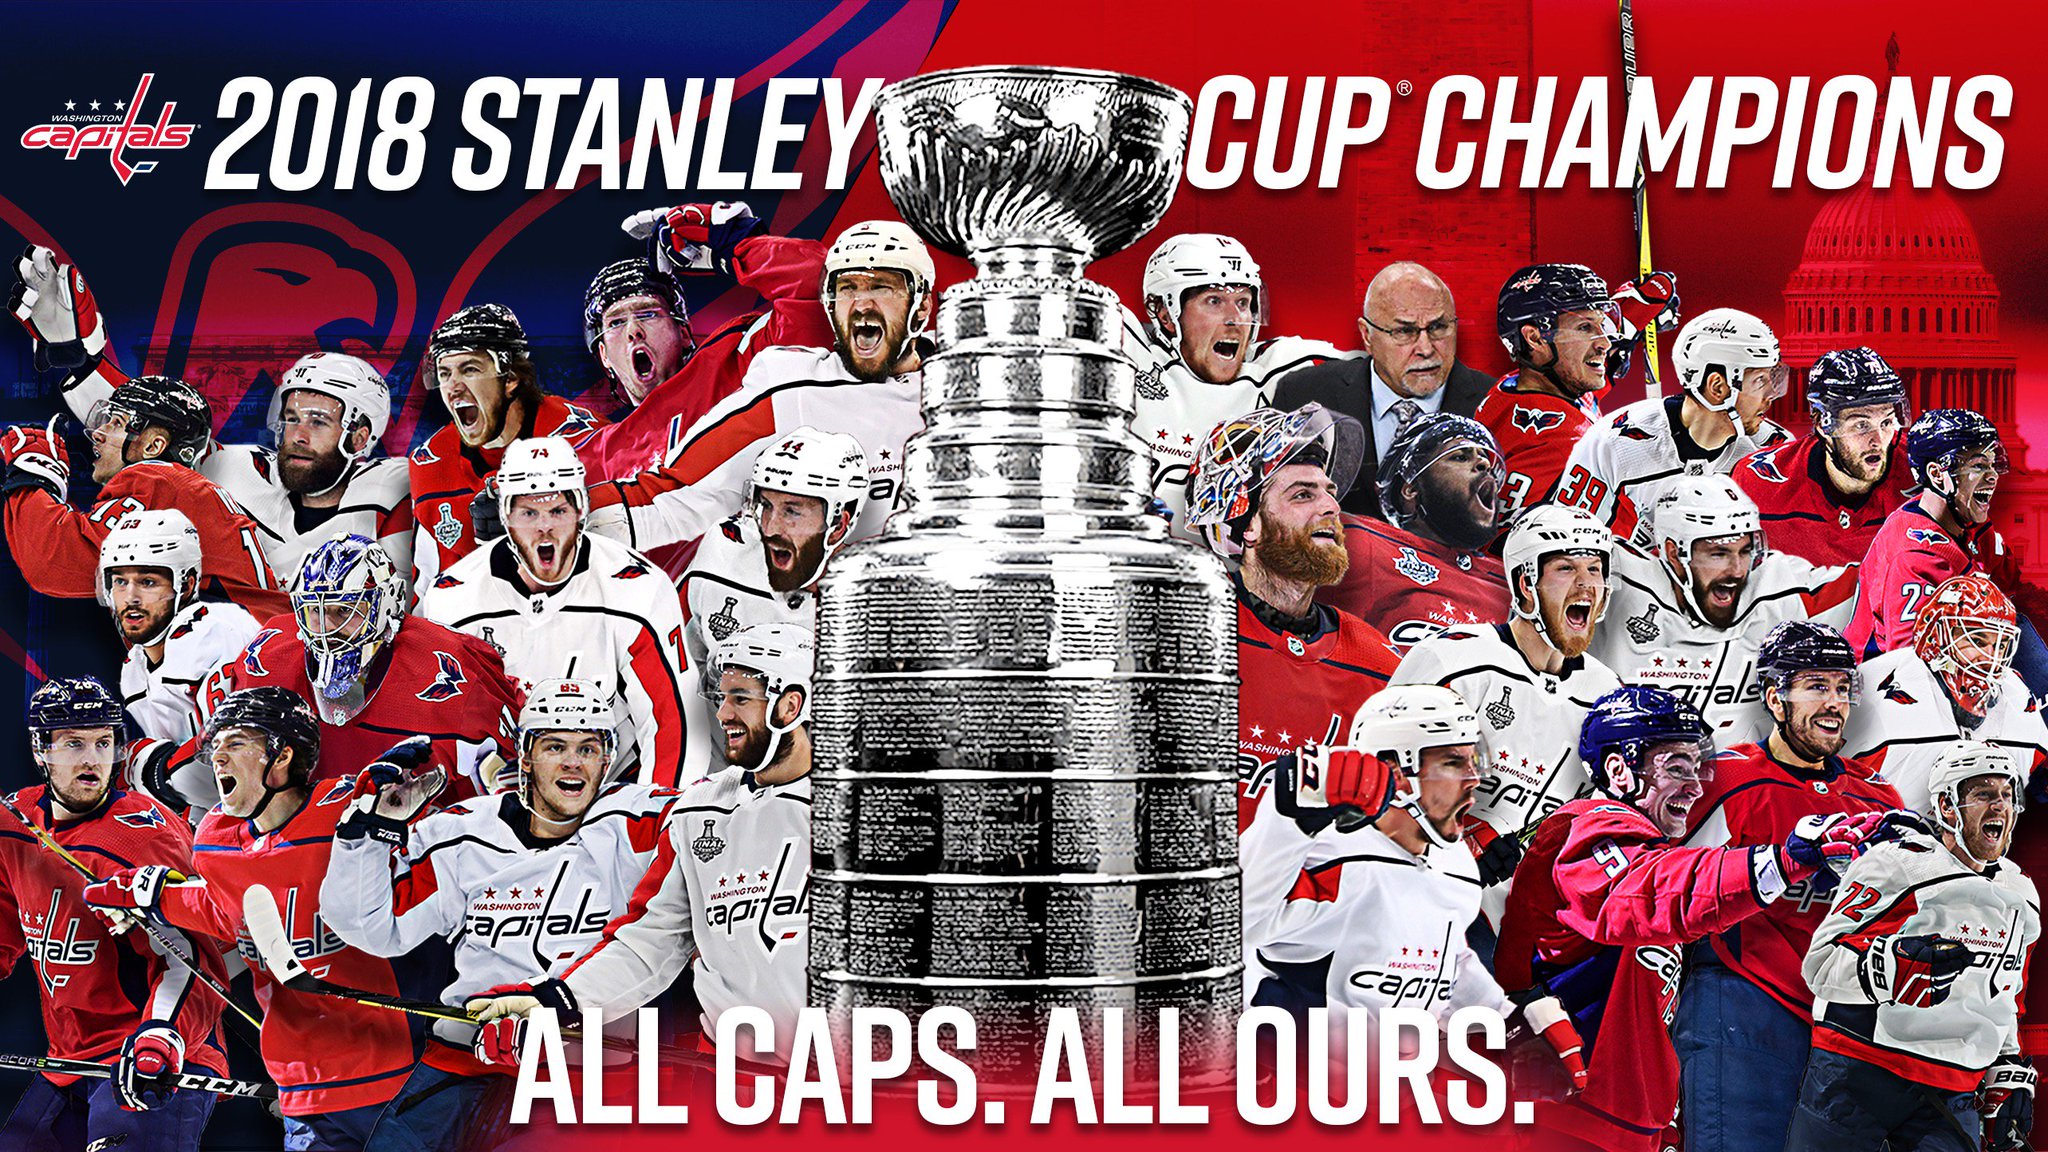 2018 Stanley Cup Finals - Wikipedia